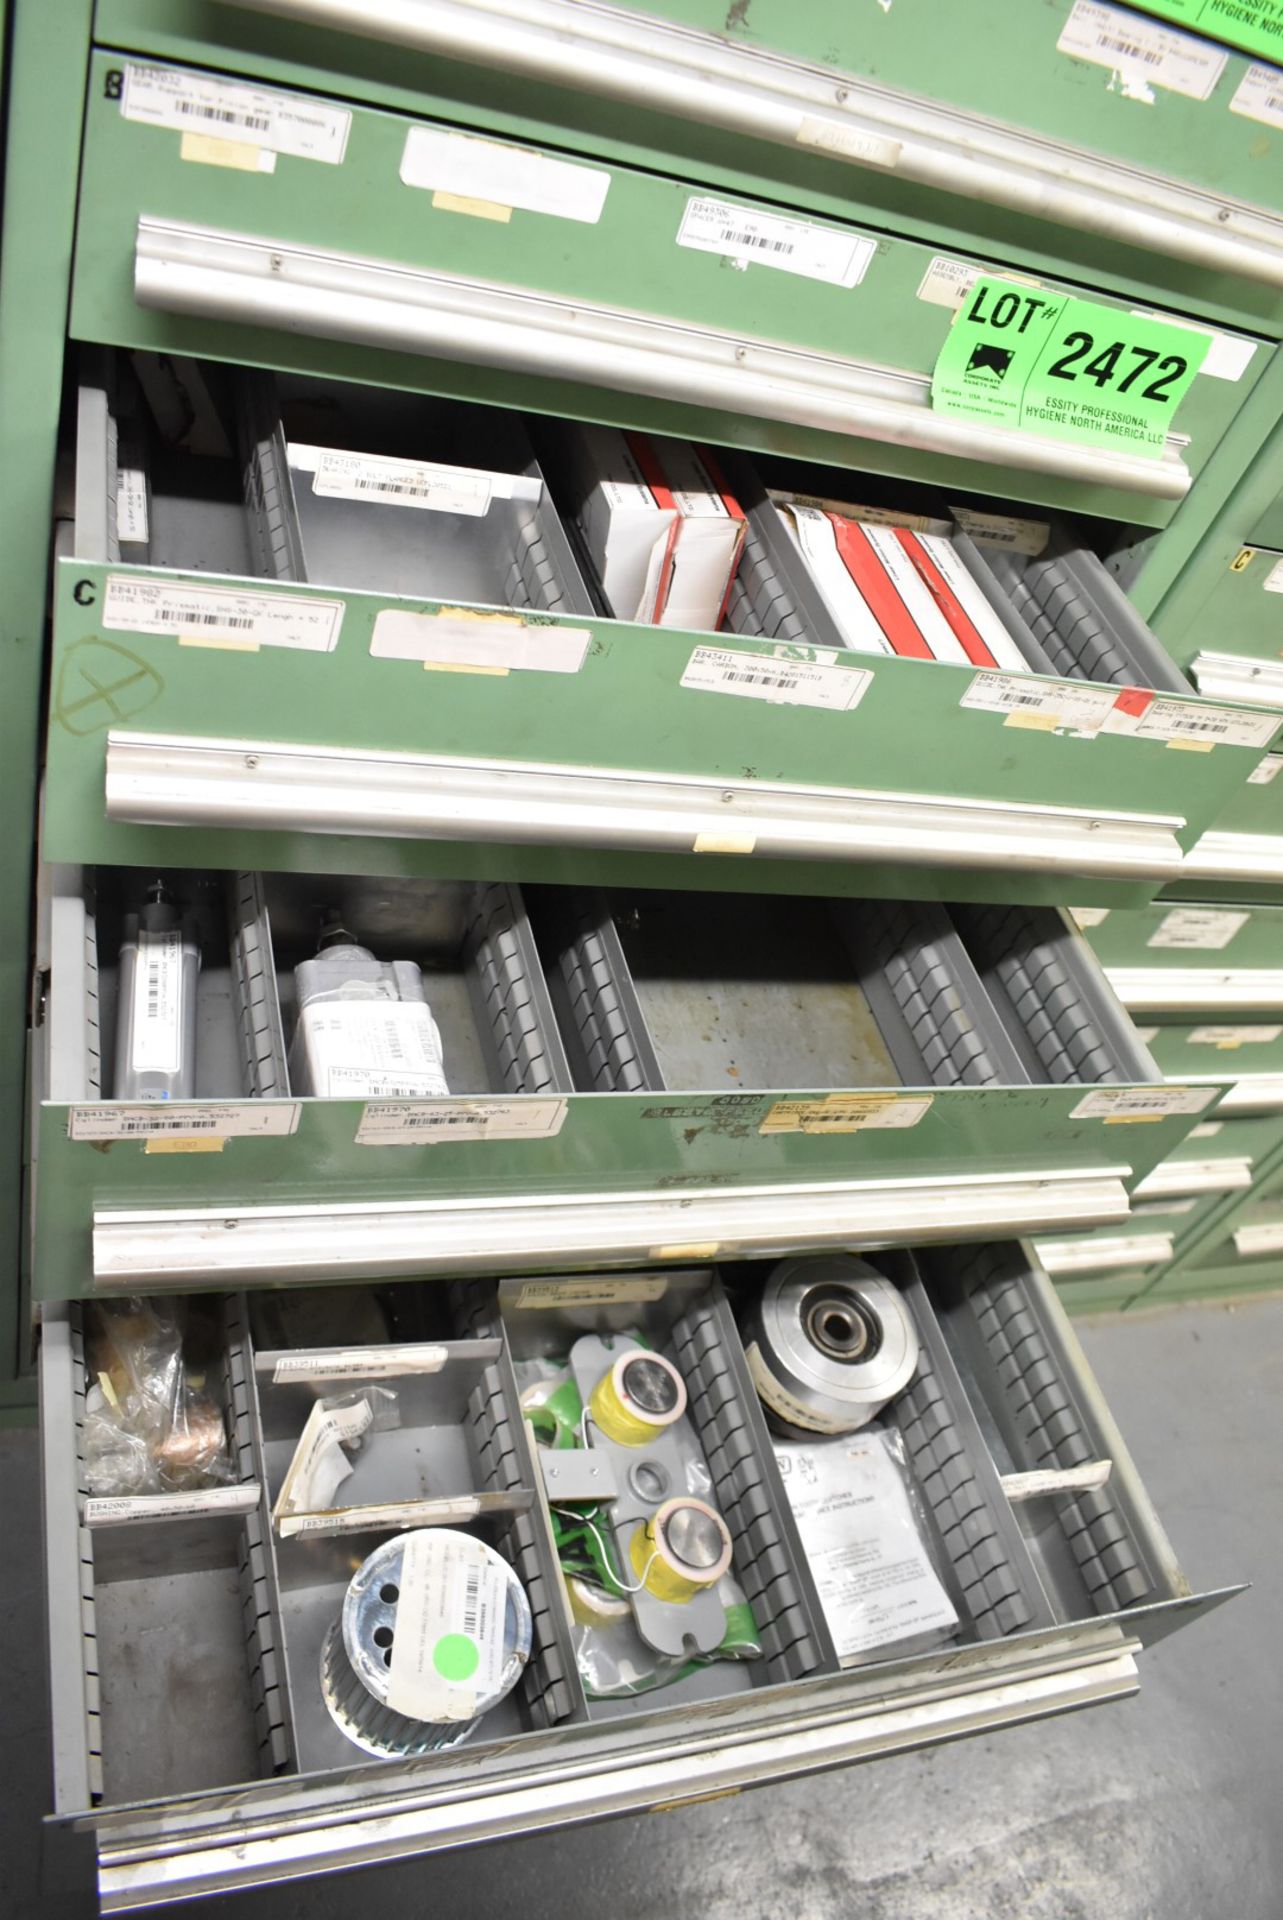 LOT/ CONTENTS OF CABINET - INCLUDING SPACERS, PRISMATIC SLIDER GUIDES, FESTO CYLINDERS, PULLEYS,